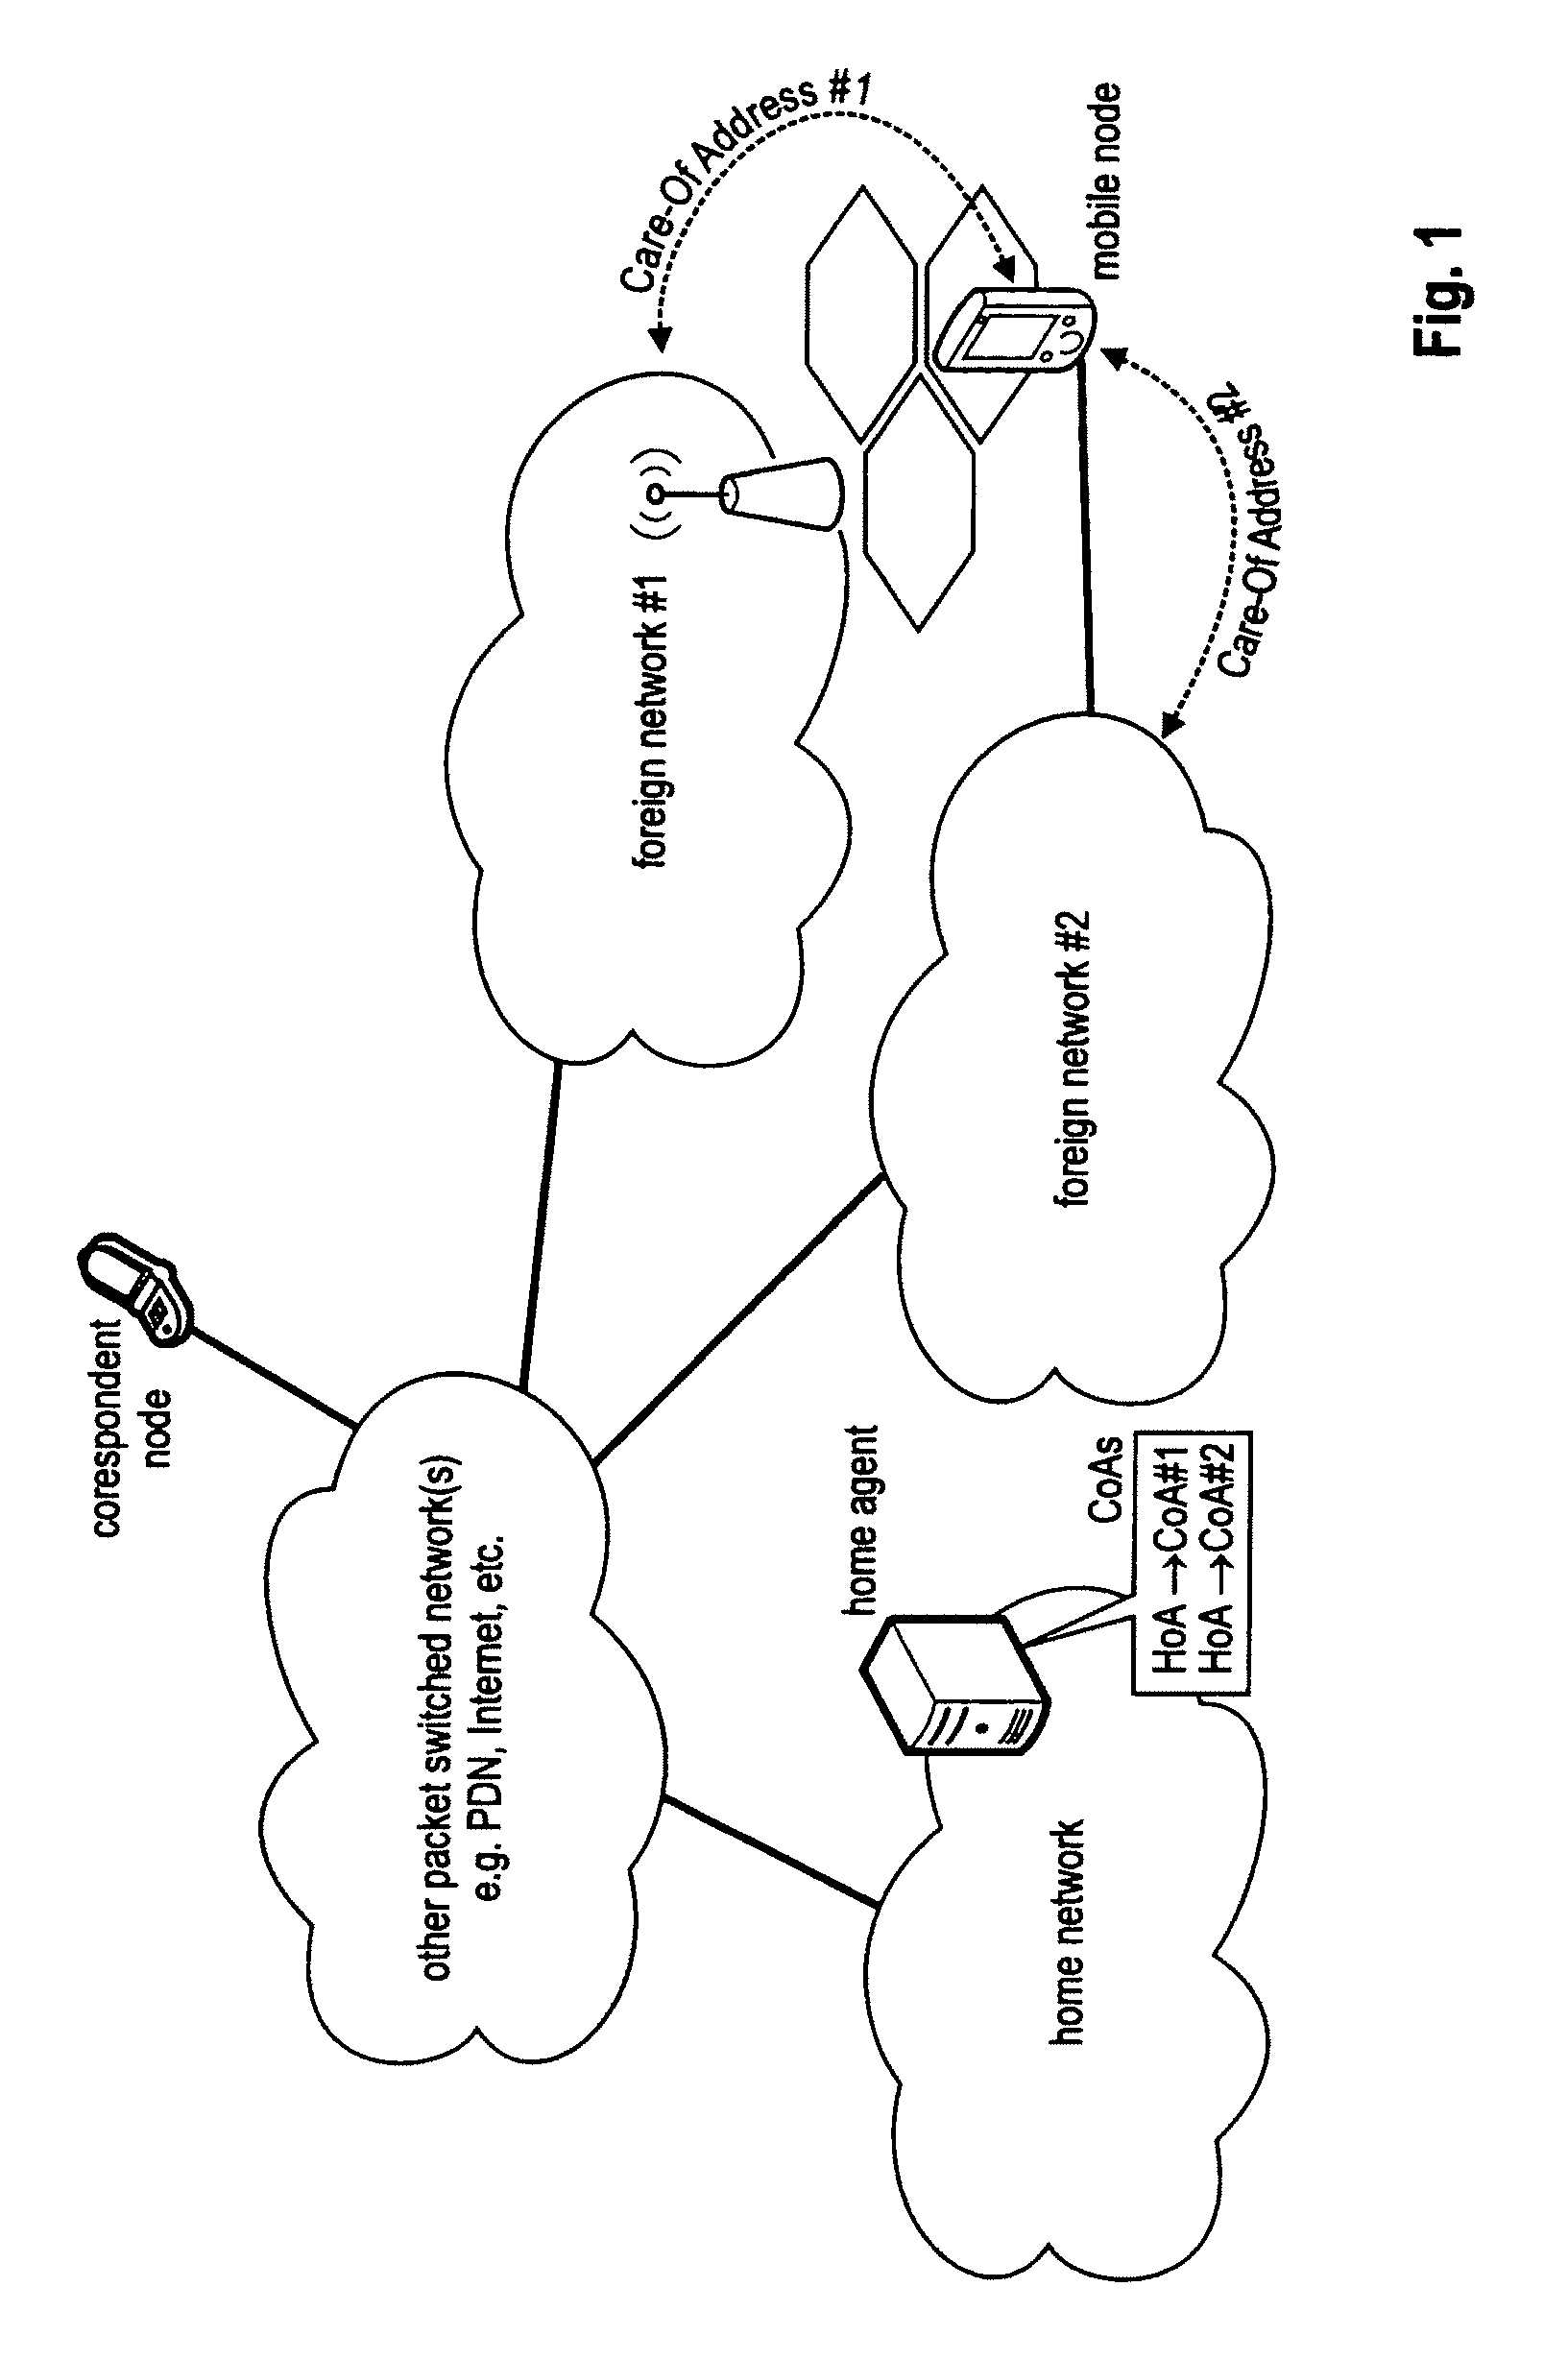 Enabling simultaneous use of home network and foreign network by a multihomed mobile node